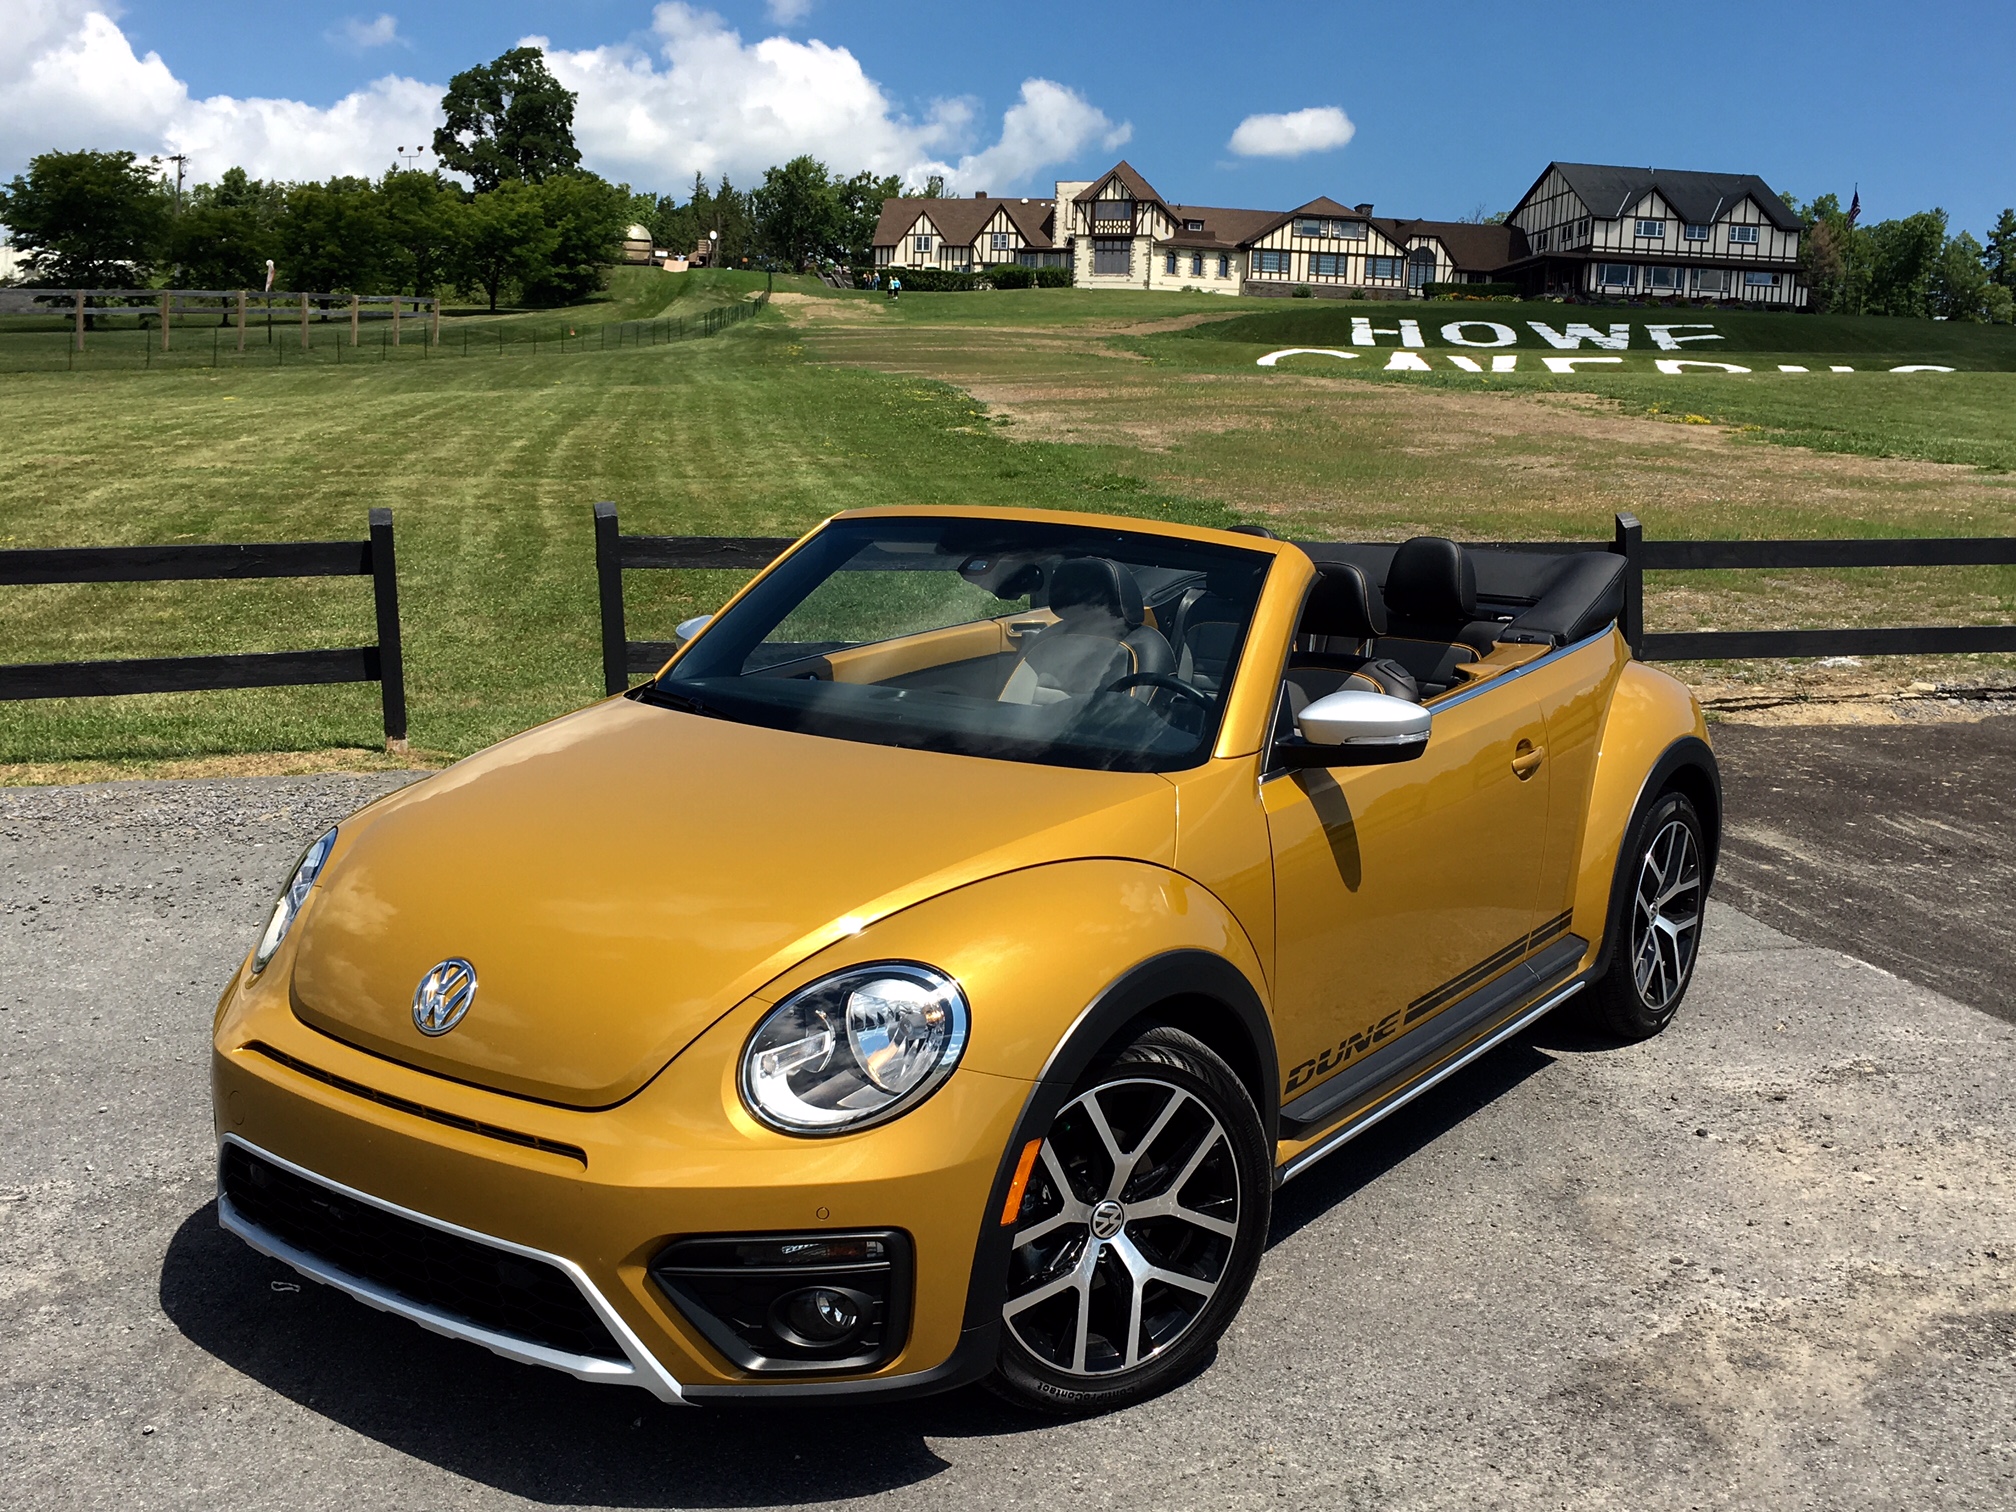 2017 VW Beetle Dune Convertible Review by Auto Critic Steve Hammes